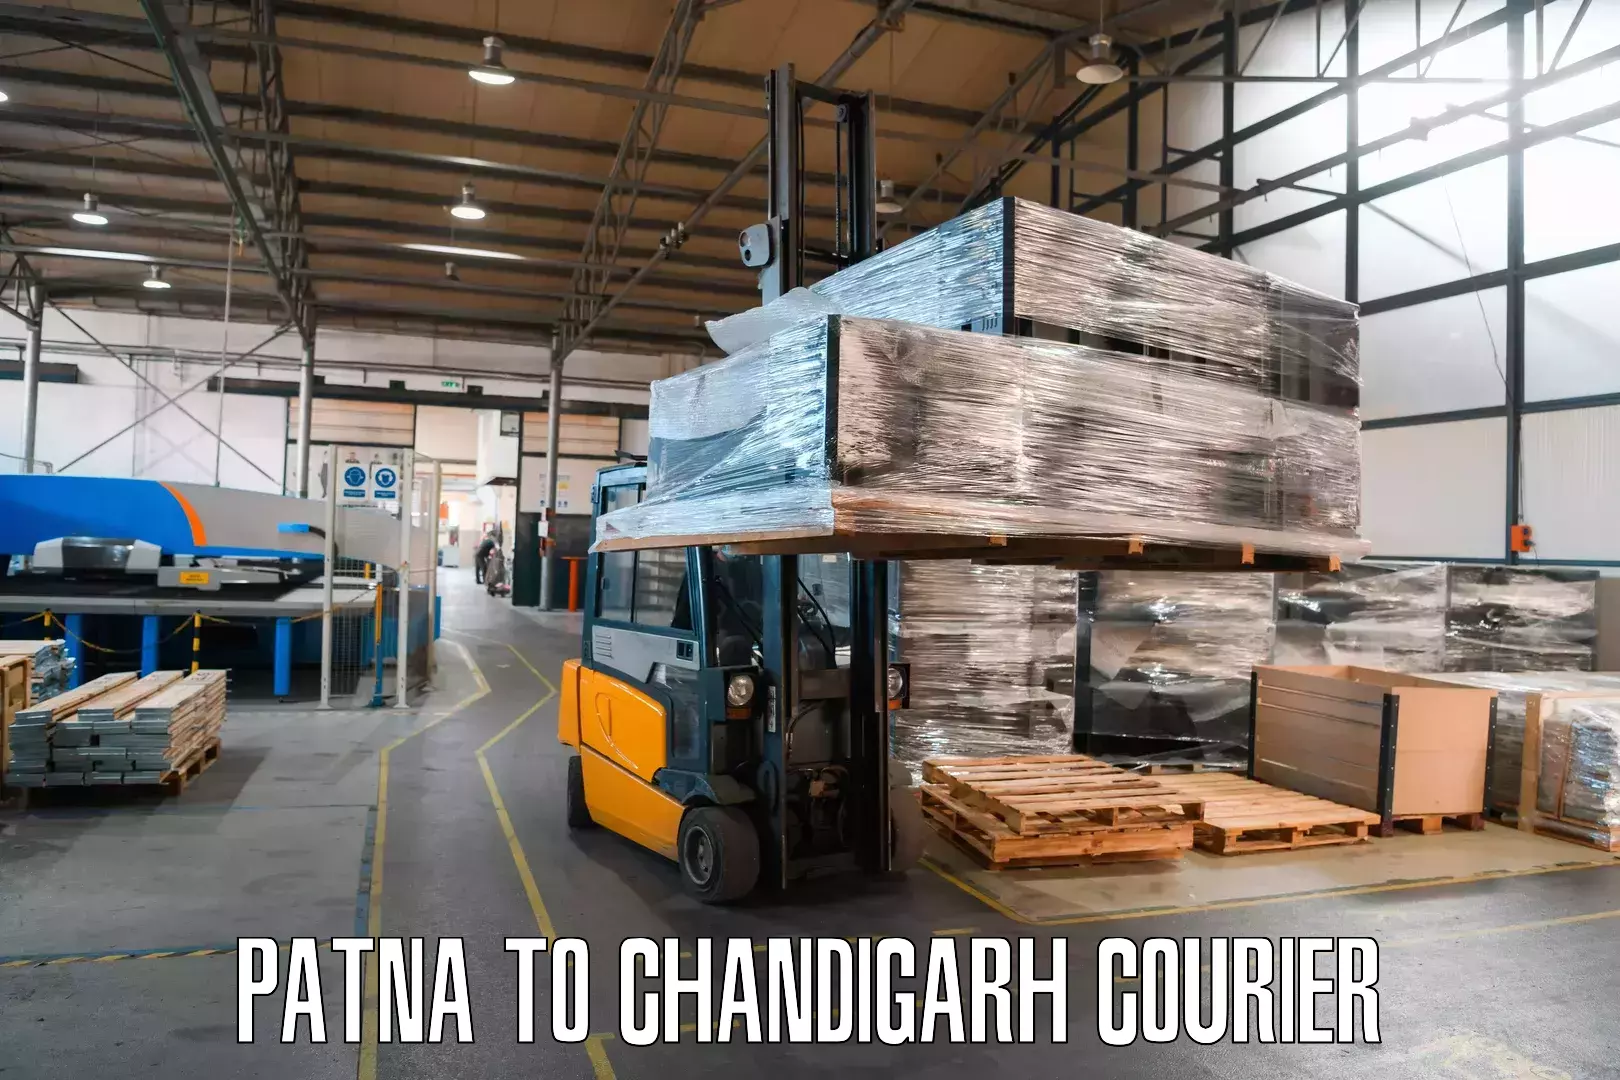 Cargo delivery service Patna to Chandigarh